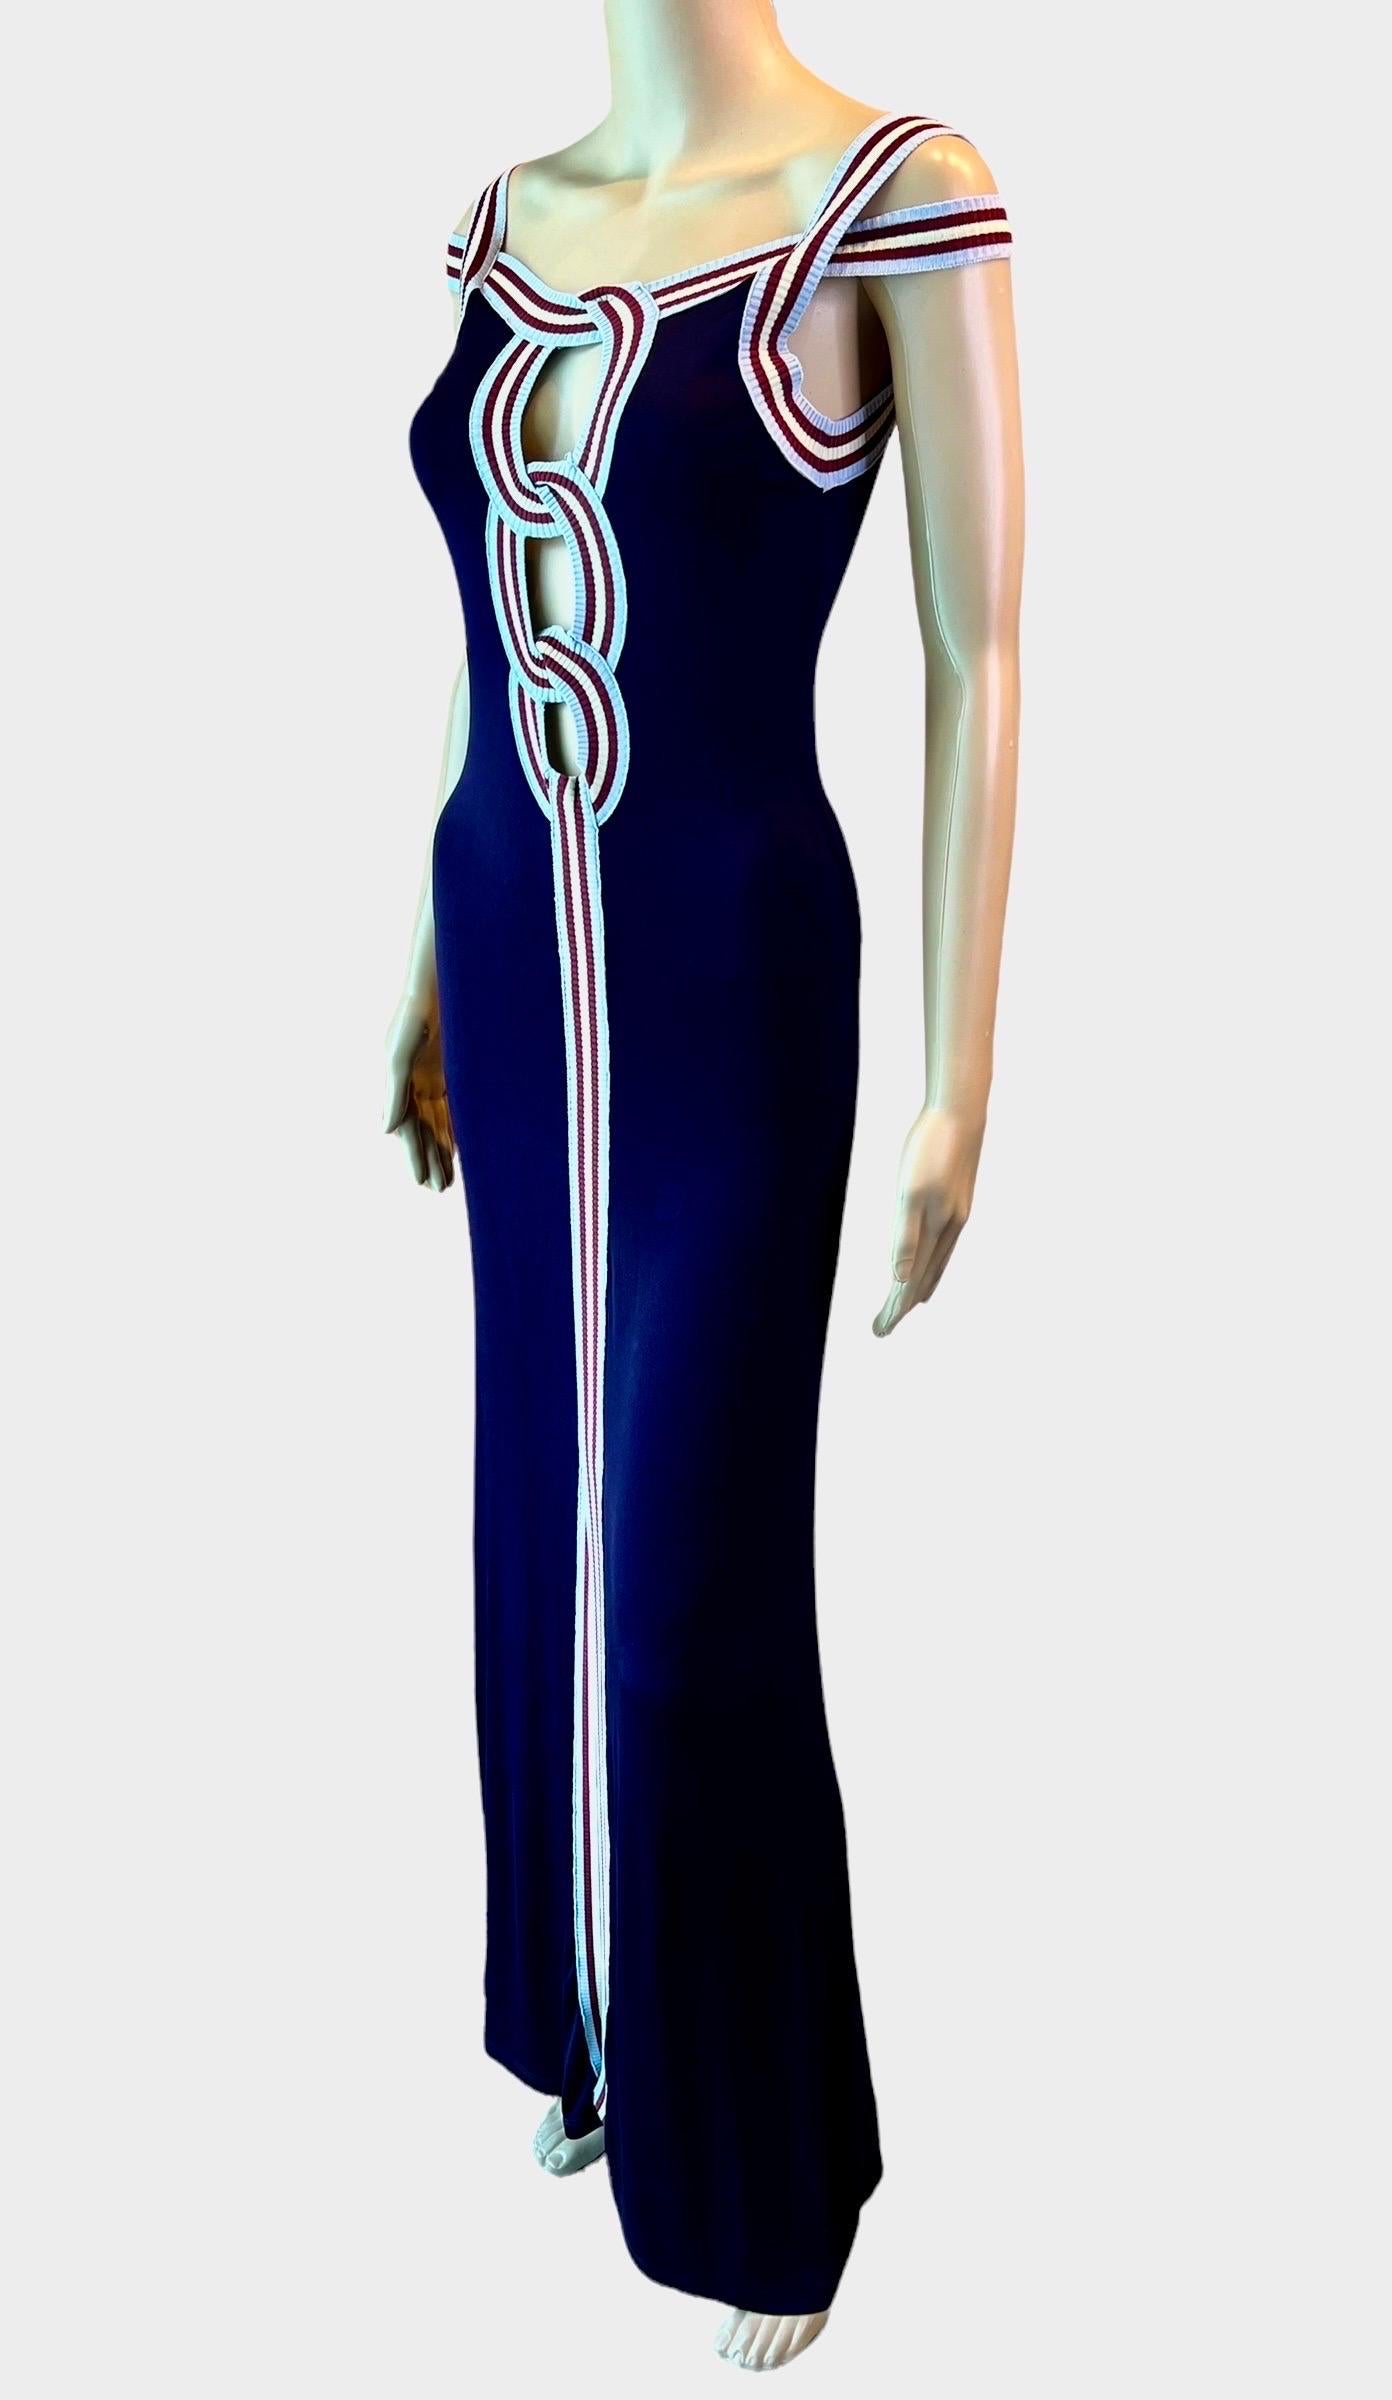 Jean Paul Gaultier S/S 2007 Cutout Bodycon Maxi Dress Size M

Please note this dress is very versatile and could be worn with the cutouts in front or back based on preference.